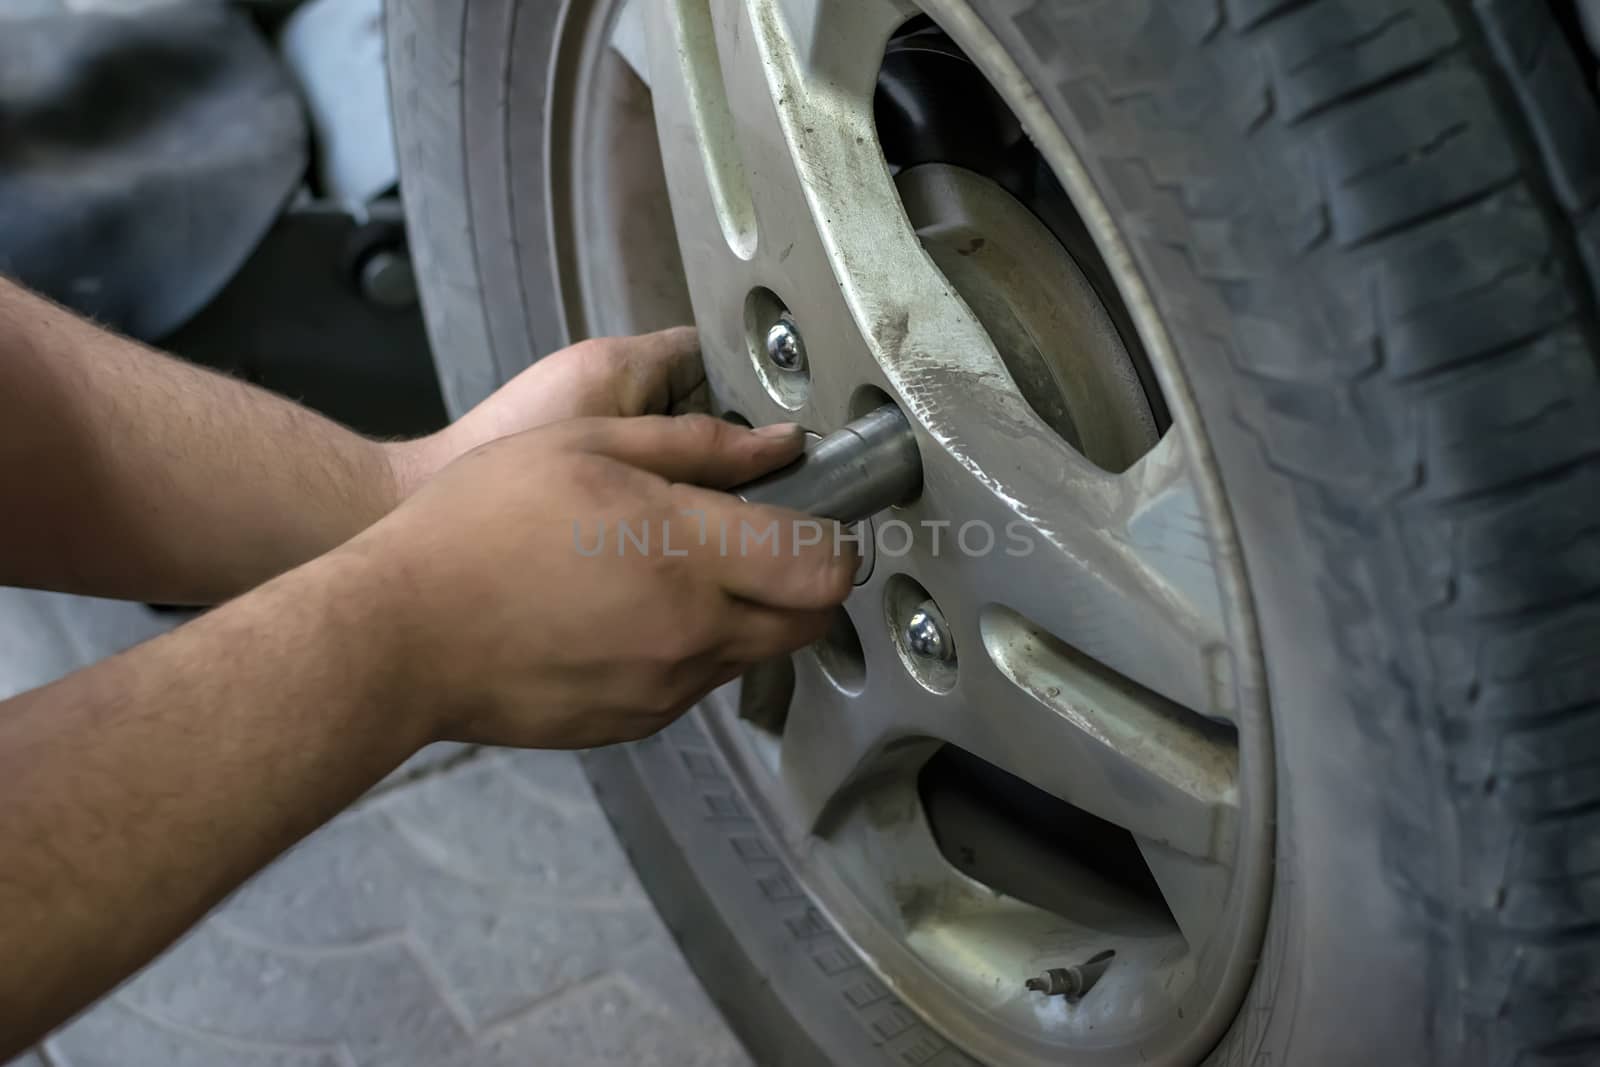 Human hands screw nuts in the wheel of the car